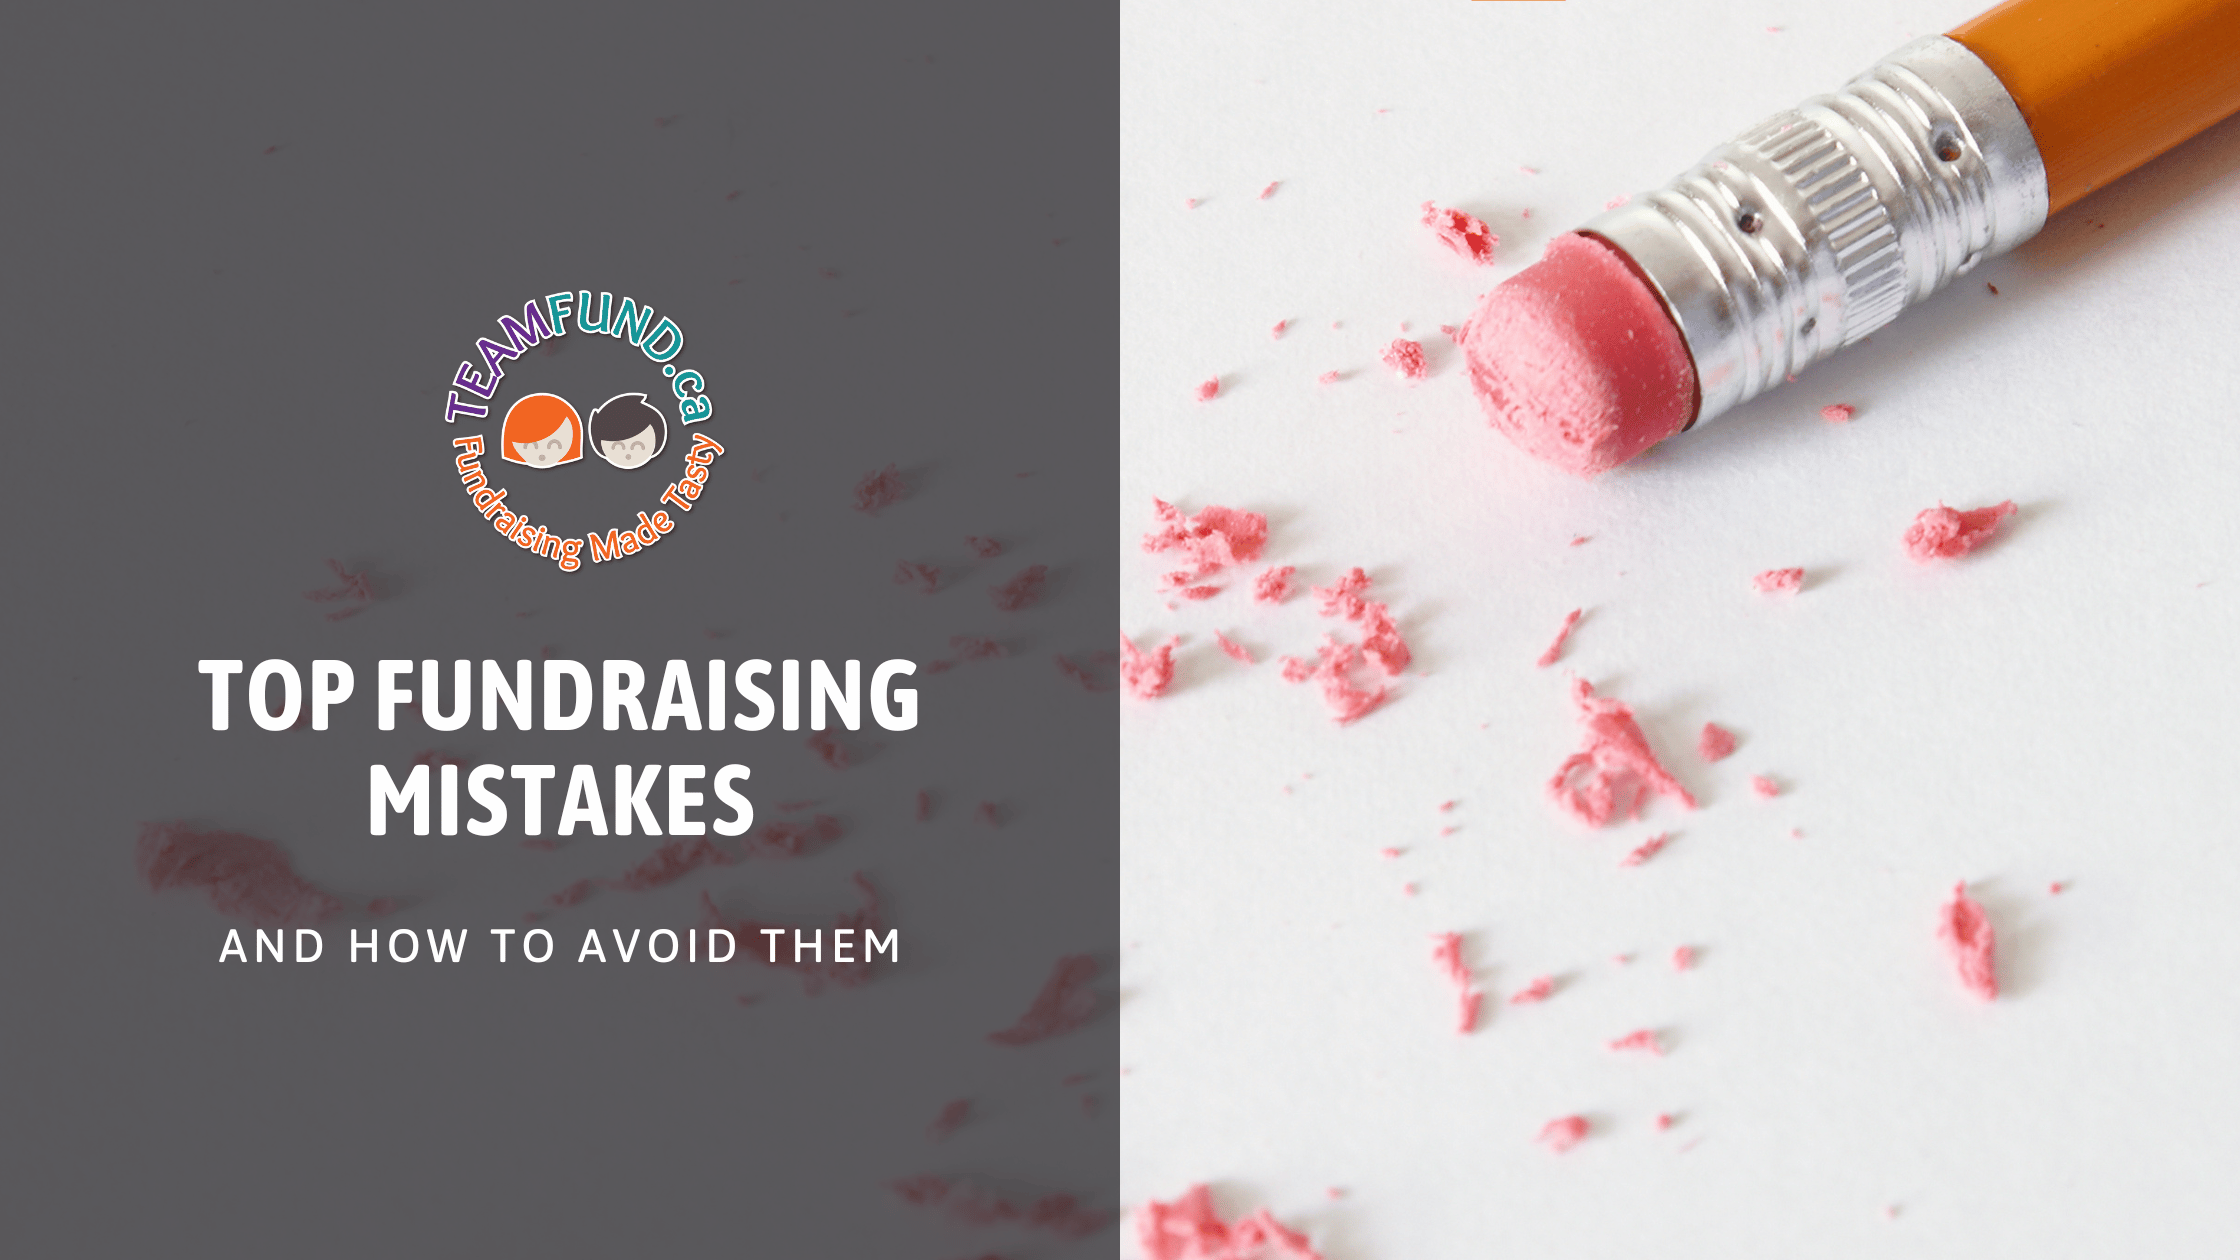 Top Fundraising Mistakes and How to Avoid Them